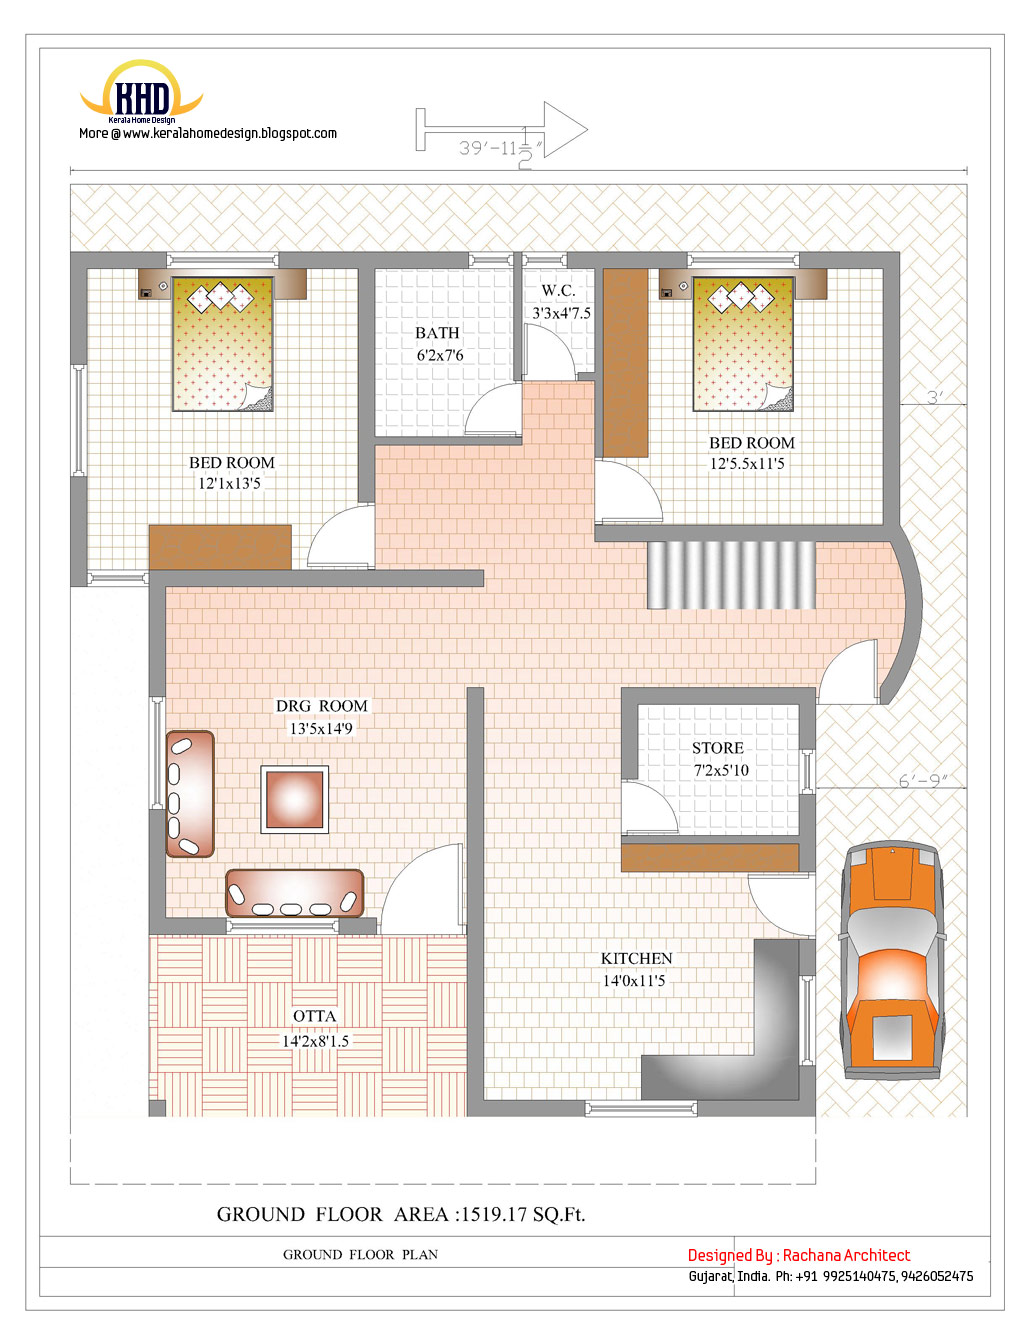  Duplex  House  Plan  and Elevation 2878 Sq  Ft  home  